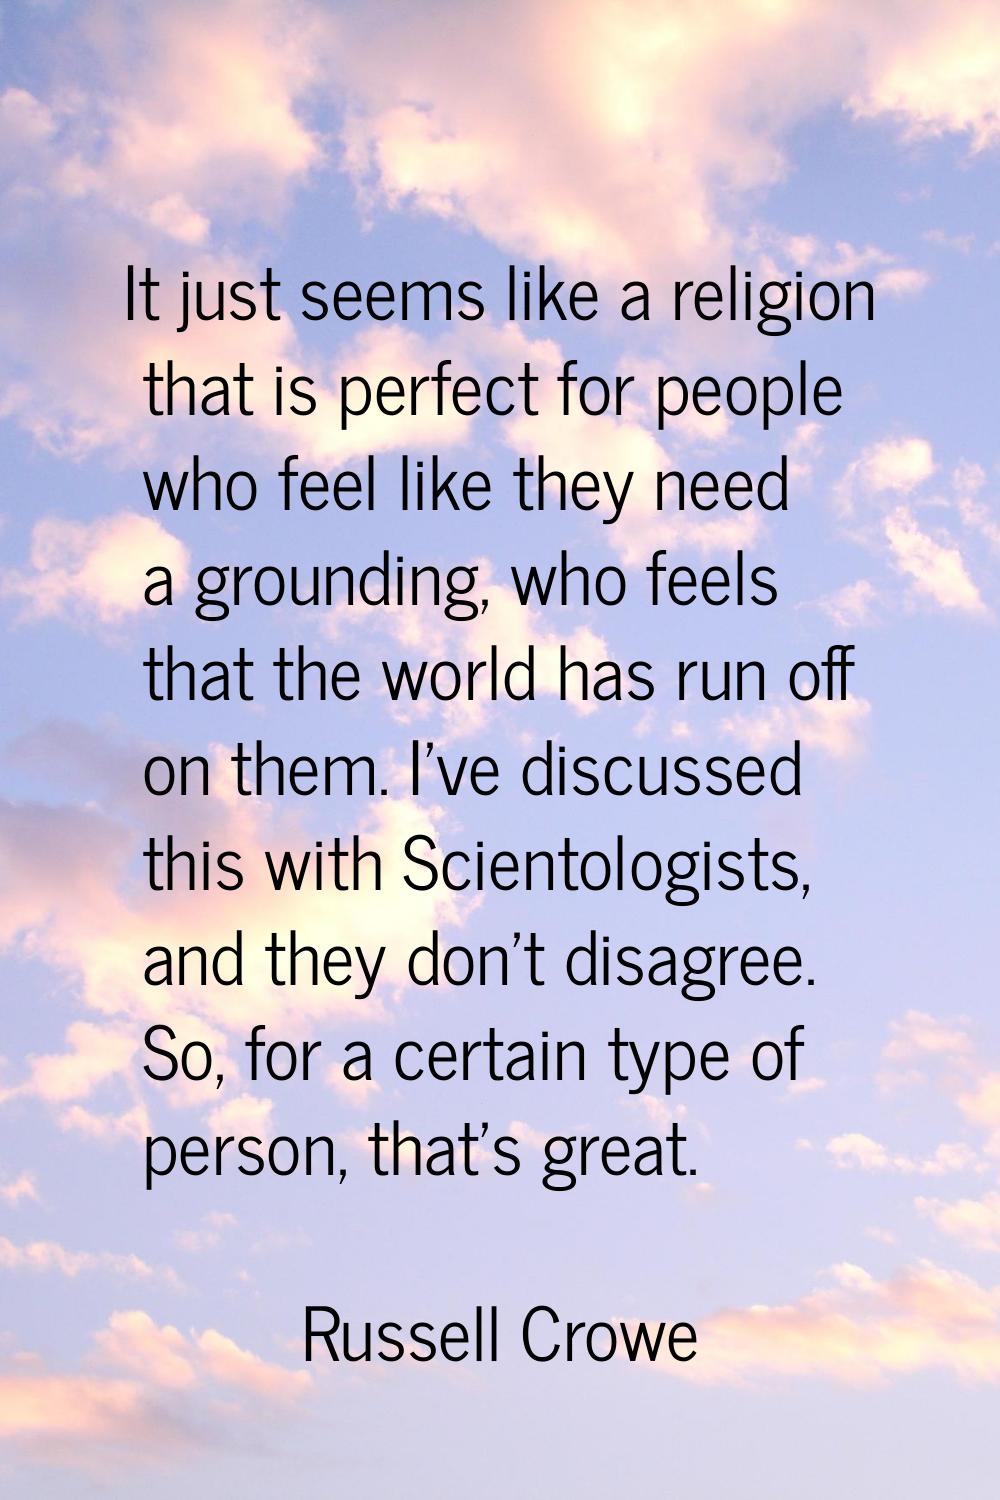 It just seems like a religion that is perfect for people who feel like they need a grounding, who f